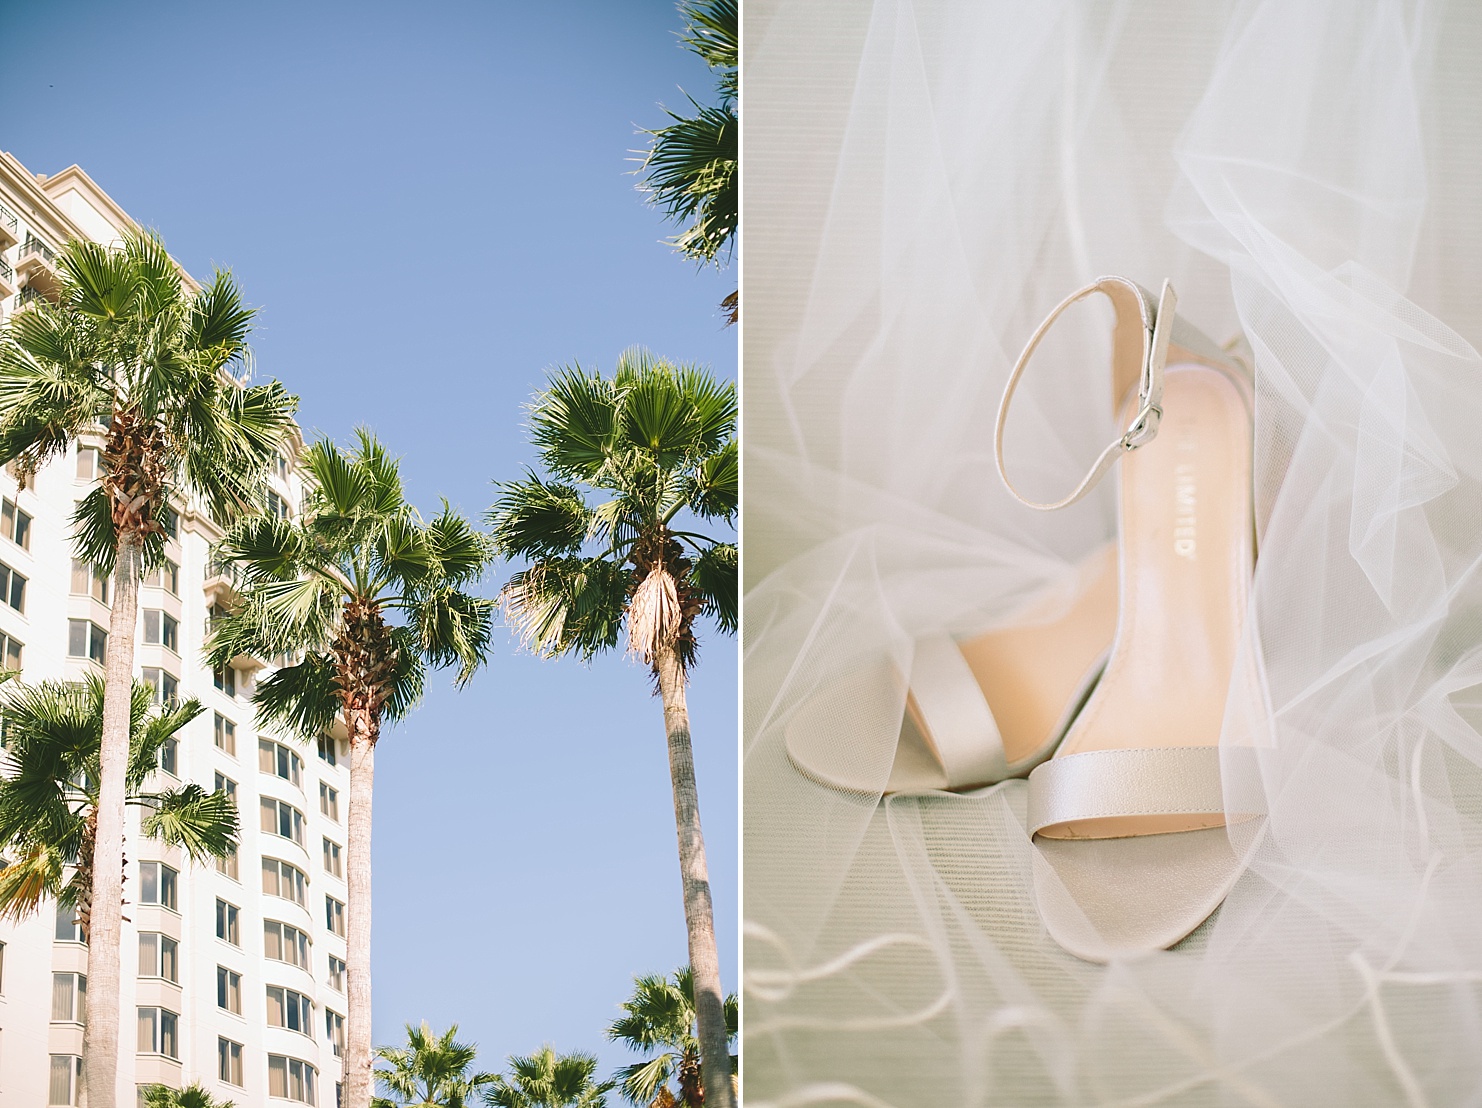 Palm trees and bride's shoes